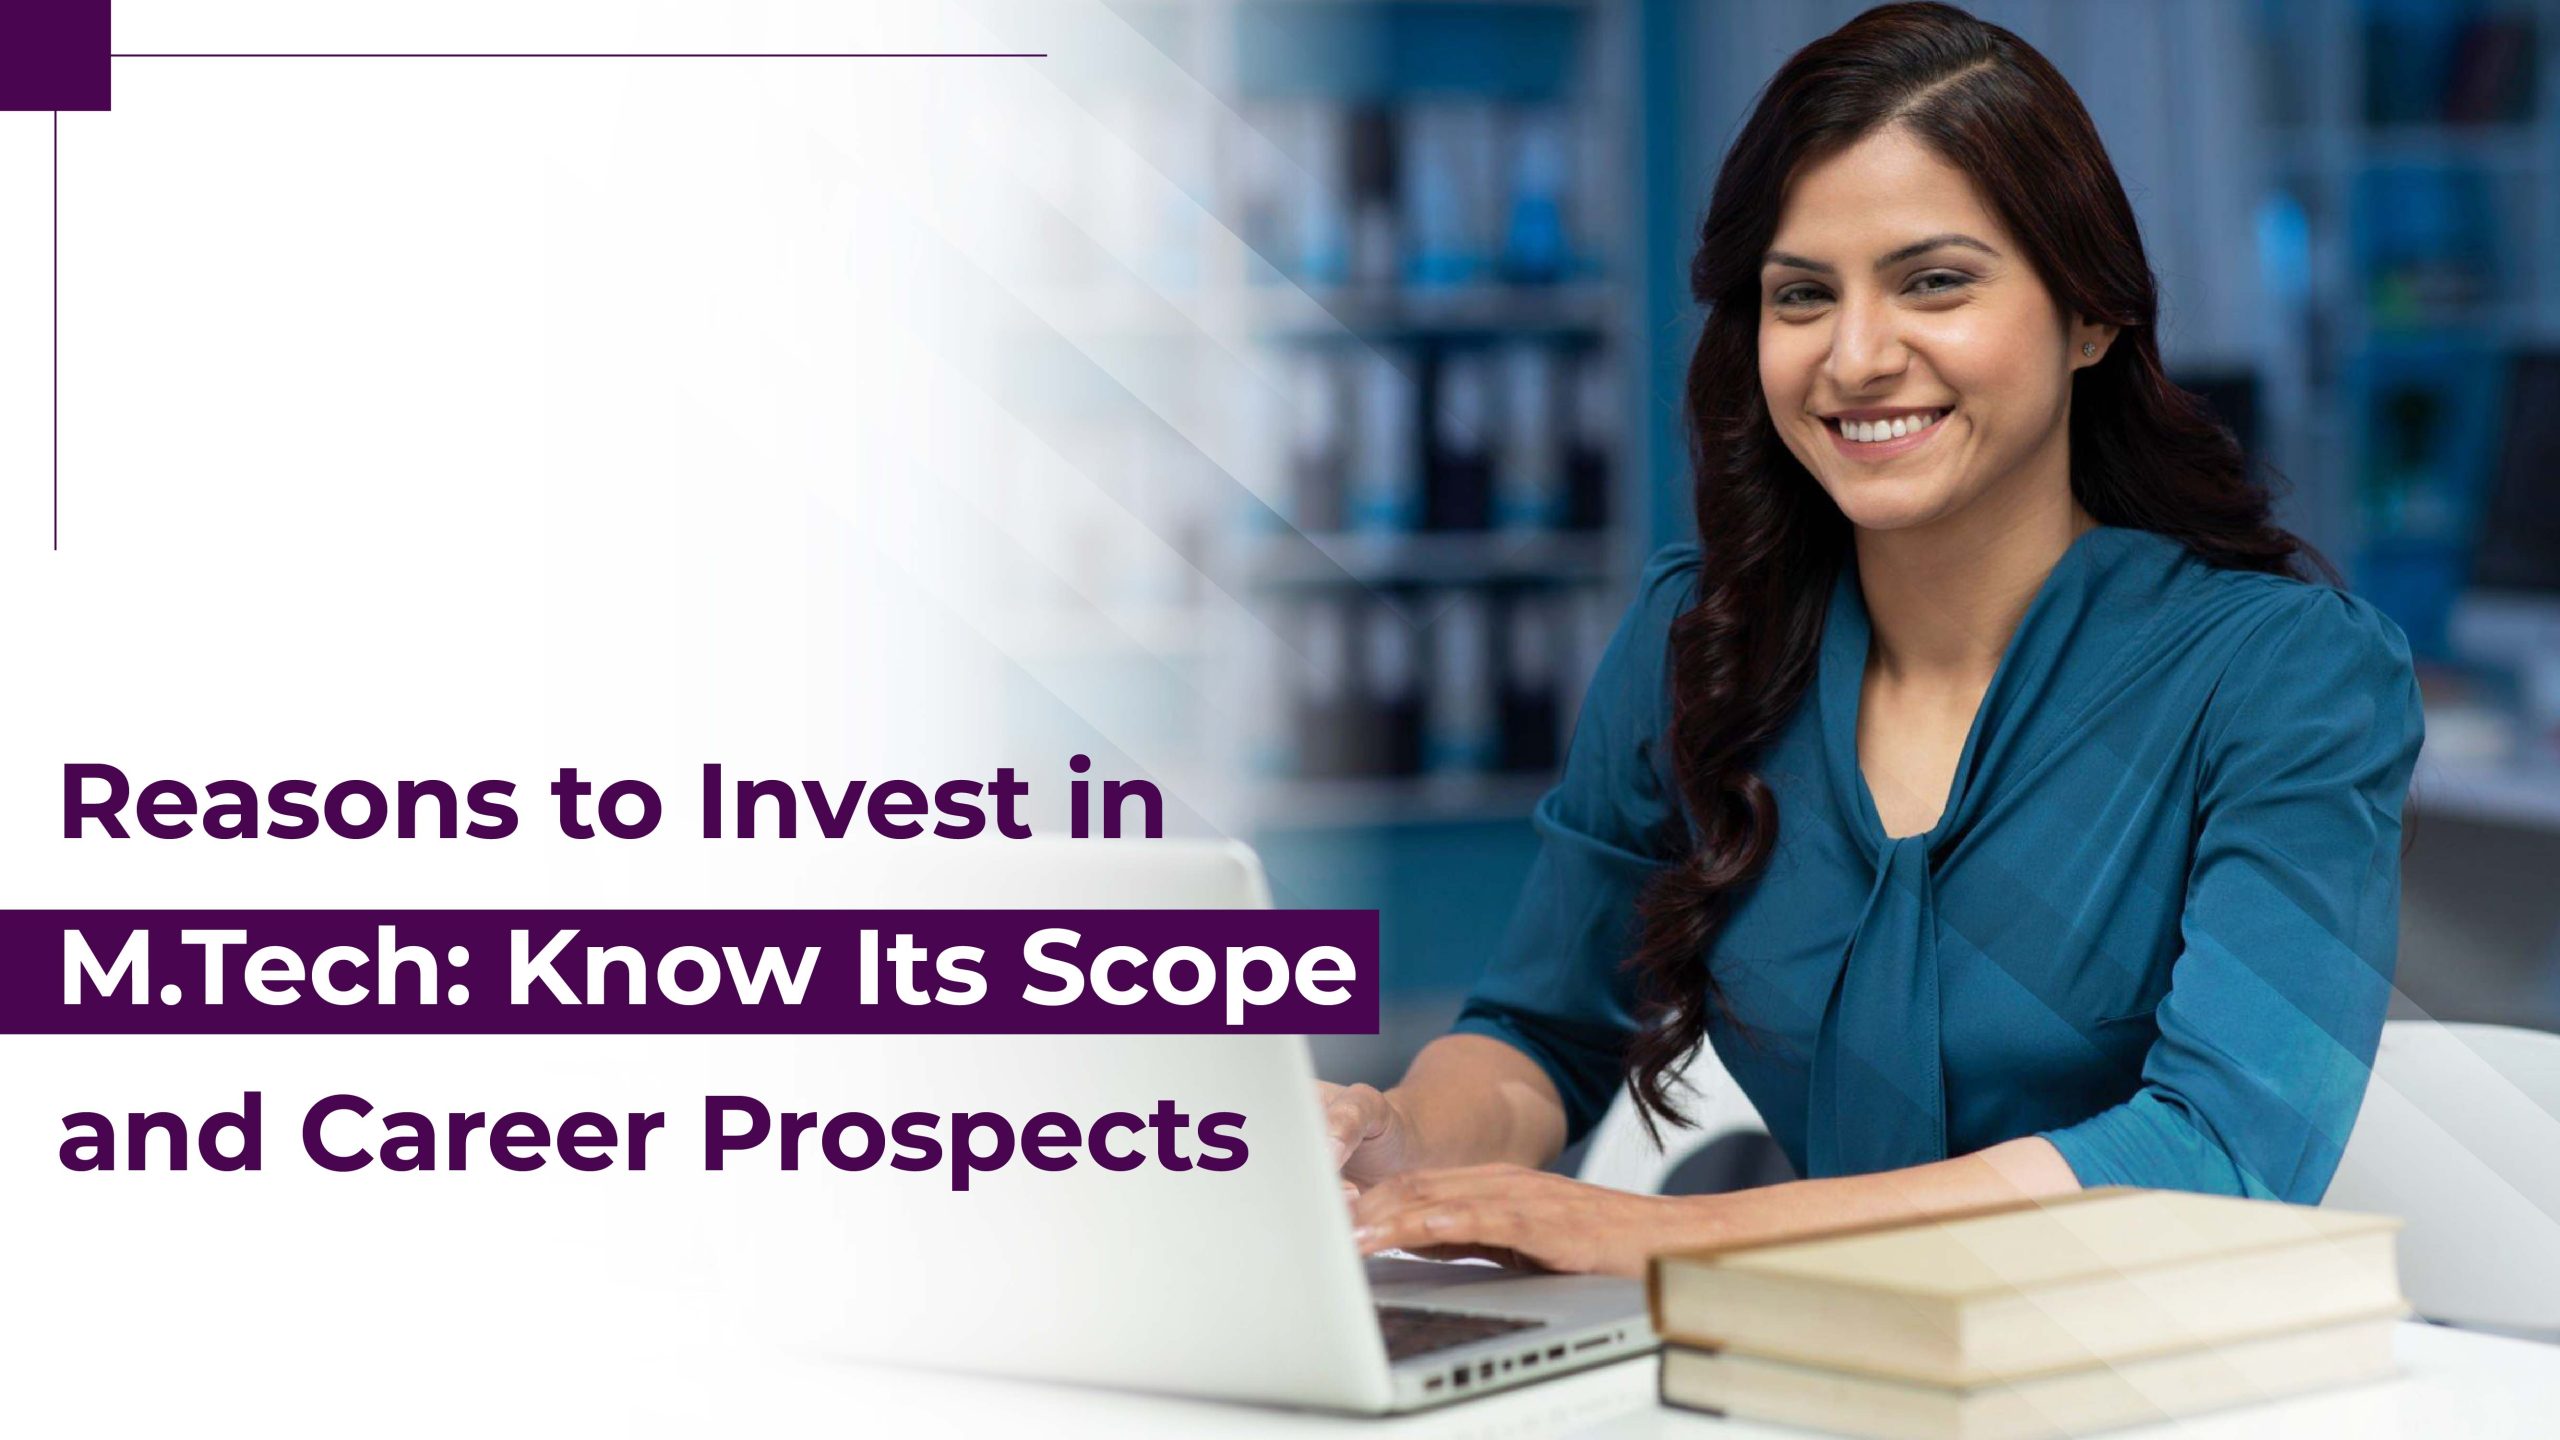 Reasons to Invest in M.Tech: Know Its Scope and Career Prospects